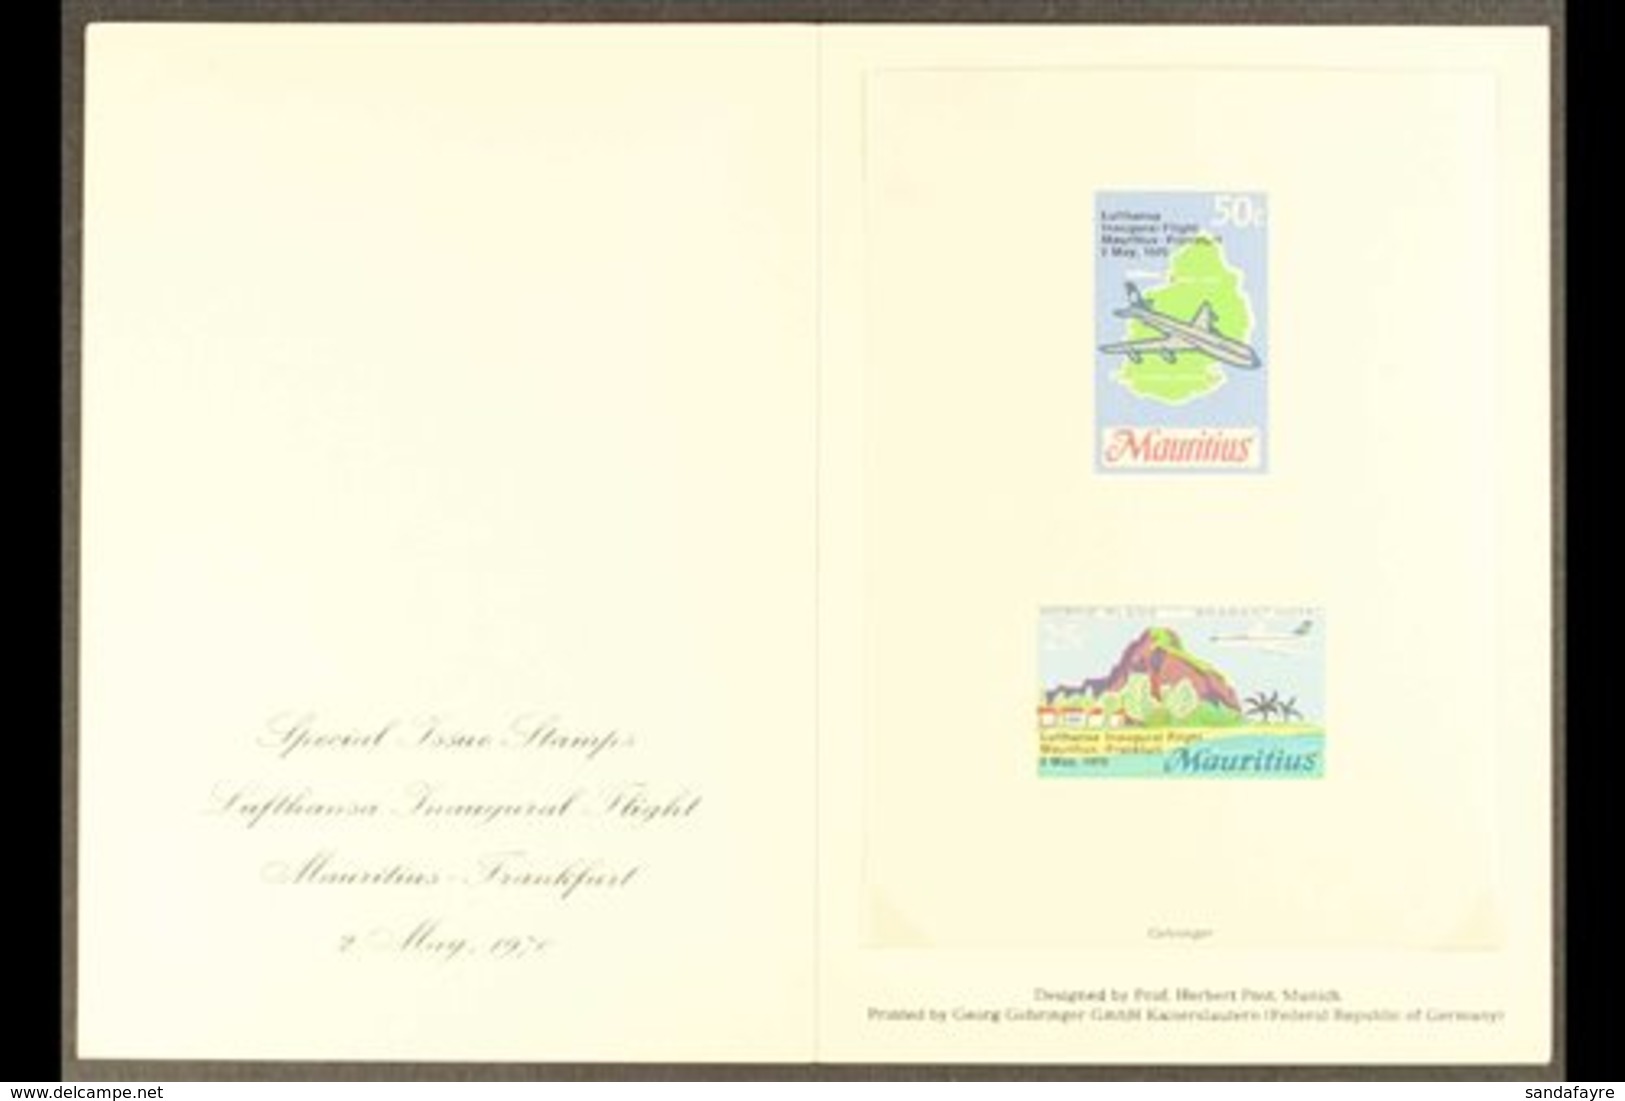 1970 Inauguration Of Lufthansa Flight COMPOSITE IMPERF DIE PROOF (SG 415/16) Printed On Gummed Paper, Never Hinged Mint, - Maurice (...-1967)